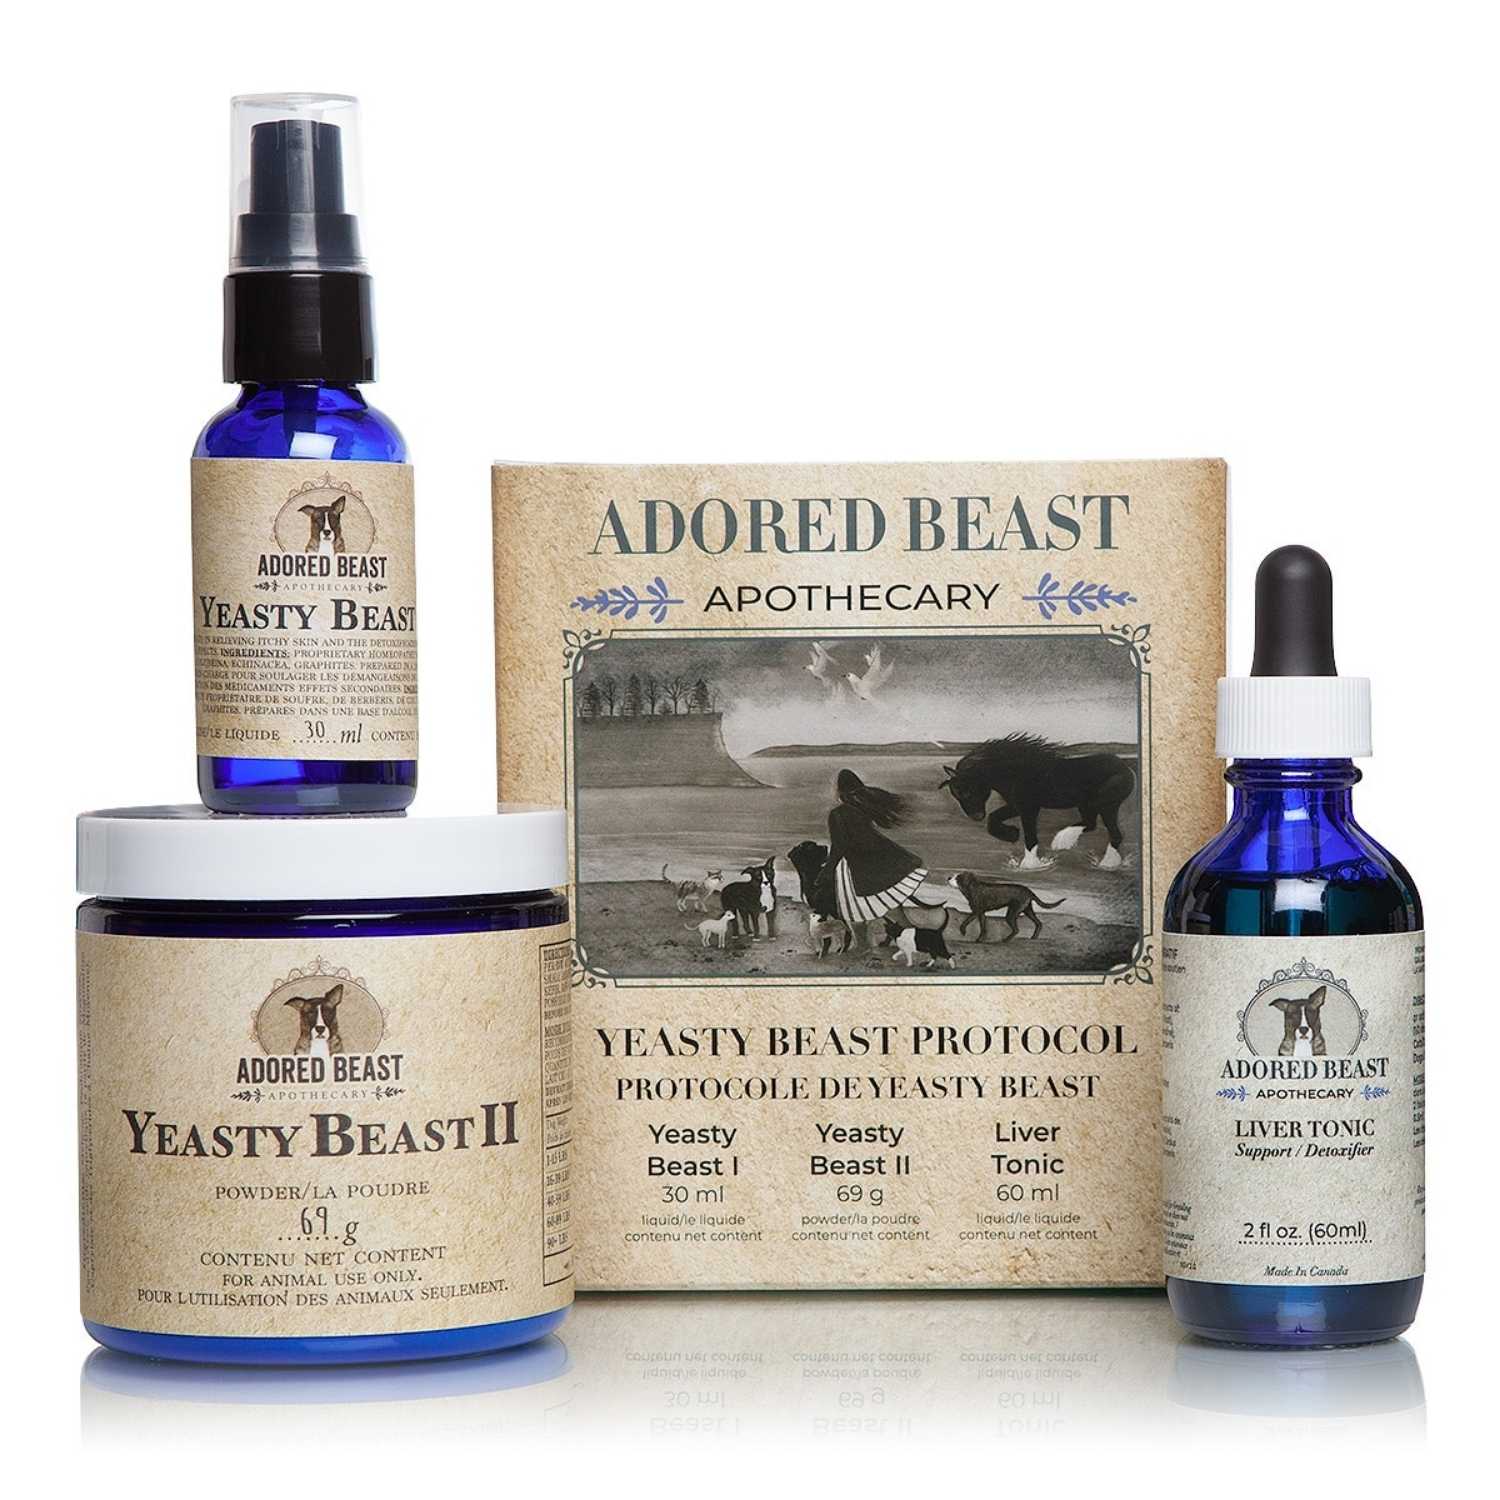 Adored Beast - Yeasty Beast Protocol (3 Product Kit) - Dog Supplement